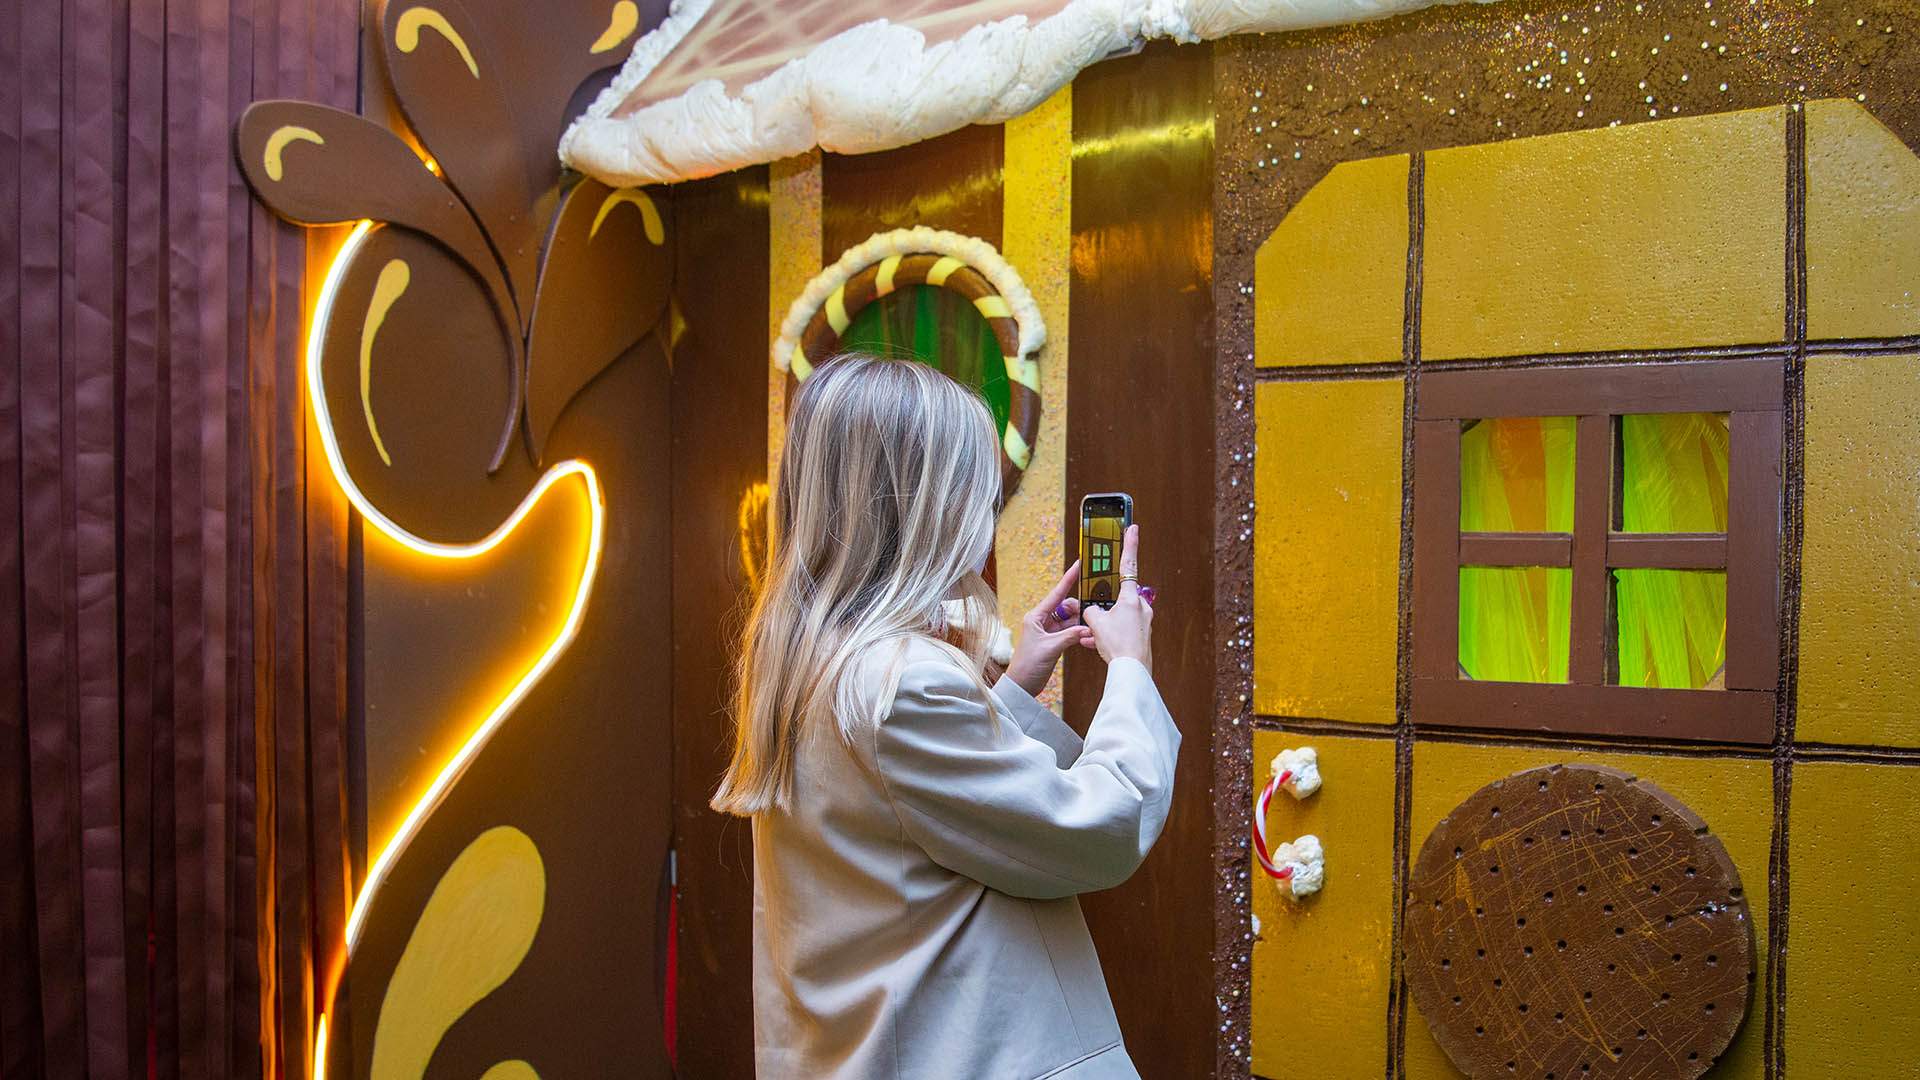 The Chocolate Factory Is Brisbane's Next Candy-Themed Pop-Up with a Gingerbread Town and Cupcake Room